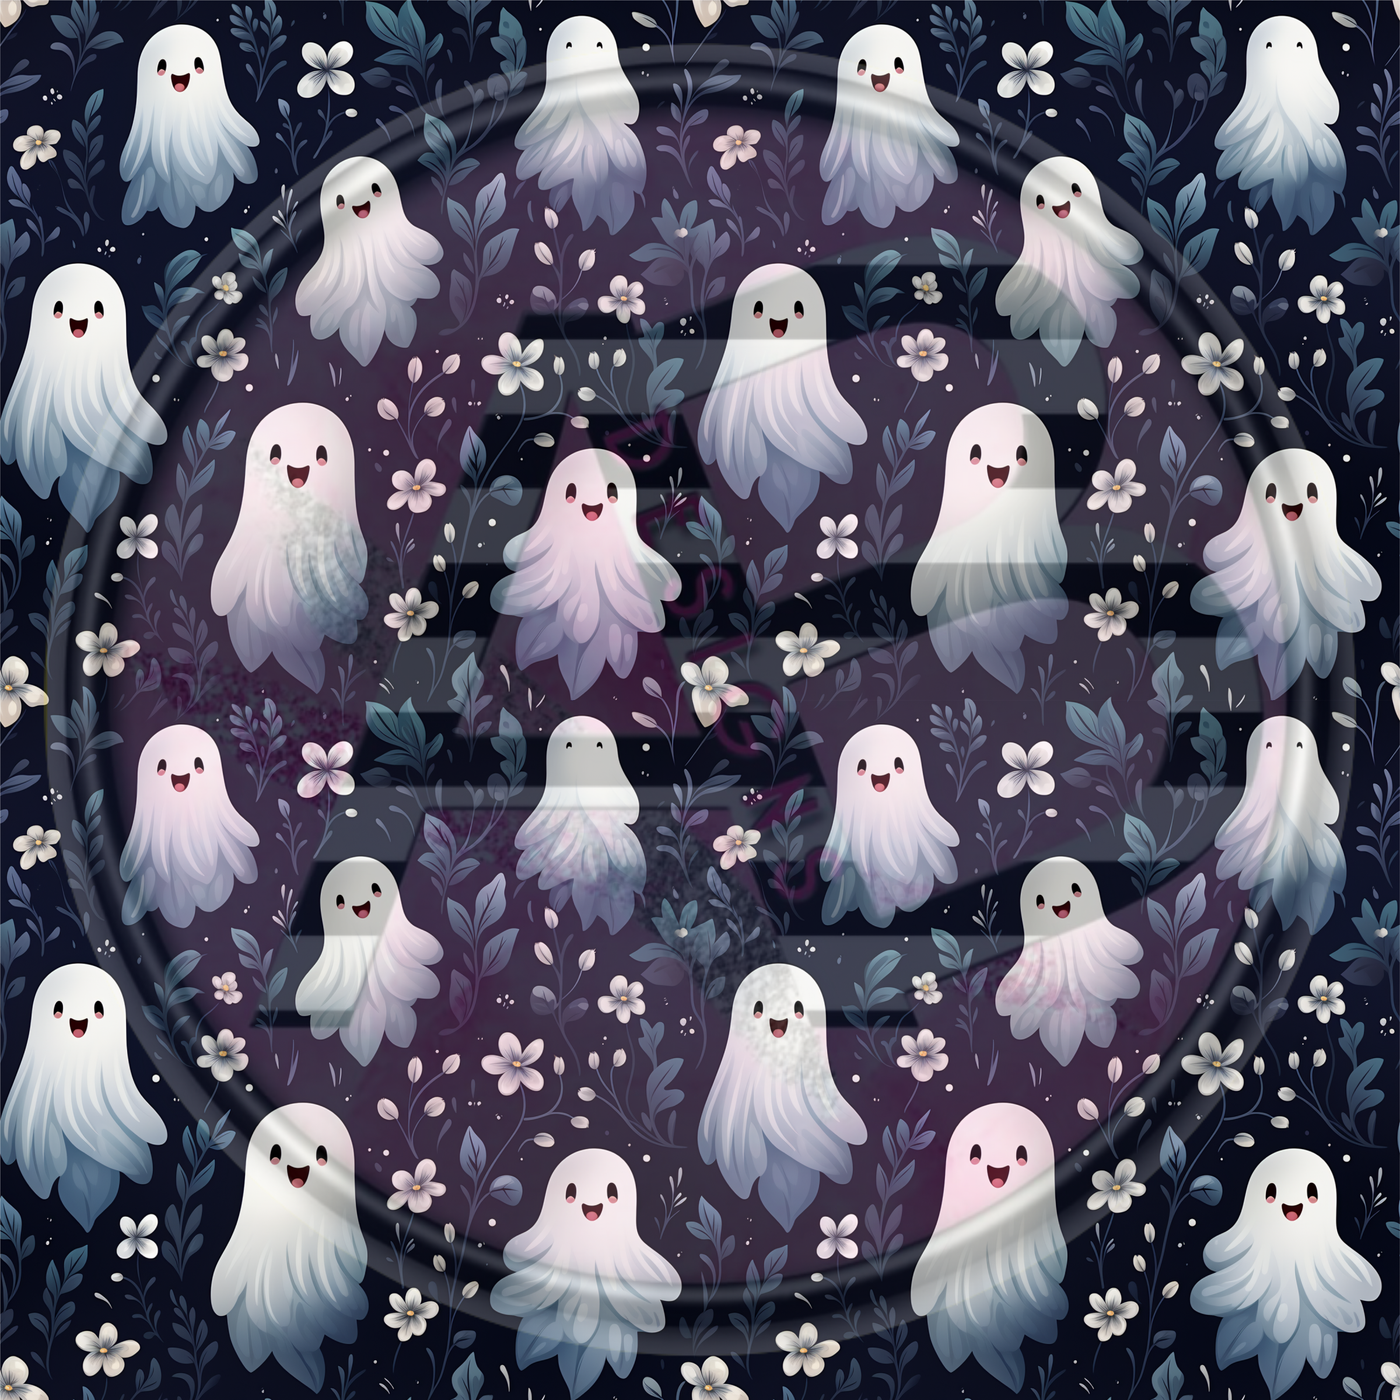 Adhesive Patterned Vinyl - Ghost 10 Smaller